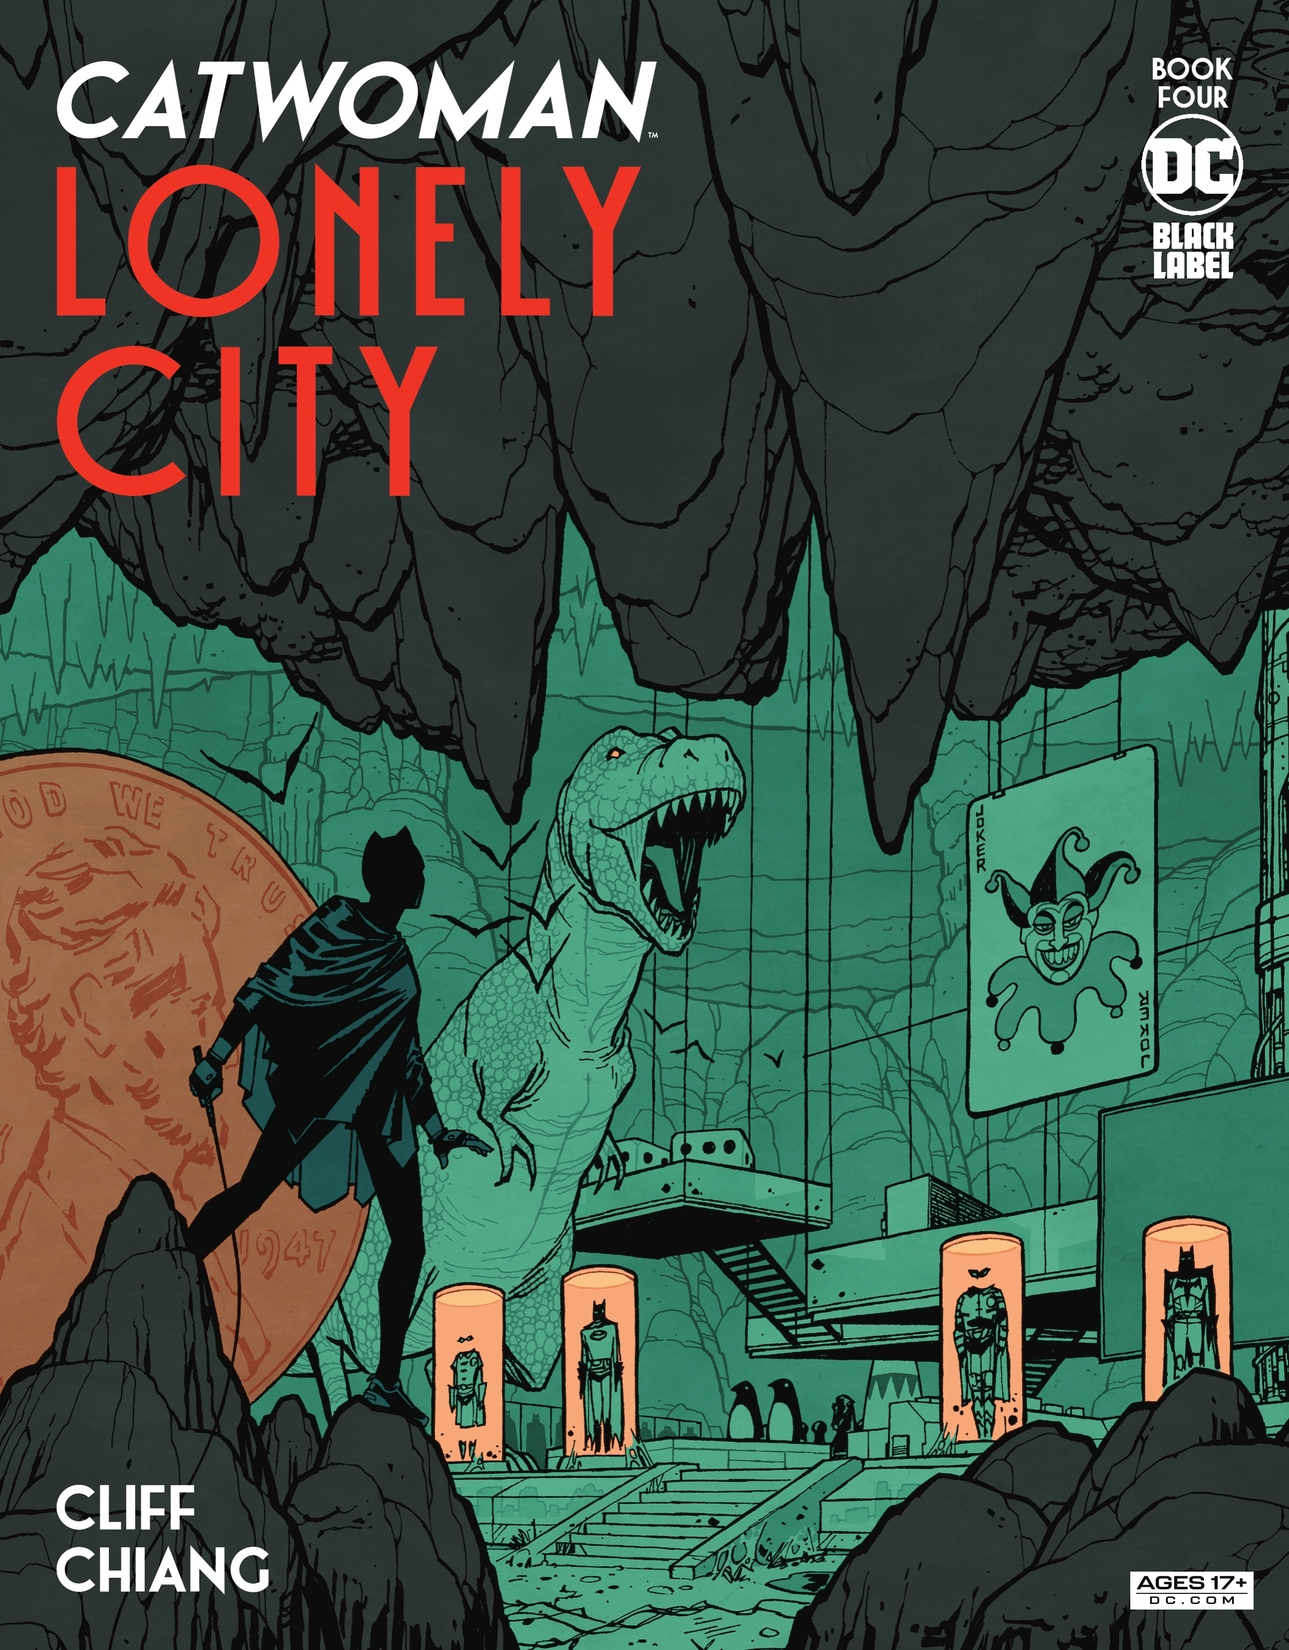 Catwoman: Lonely City #4 preview images